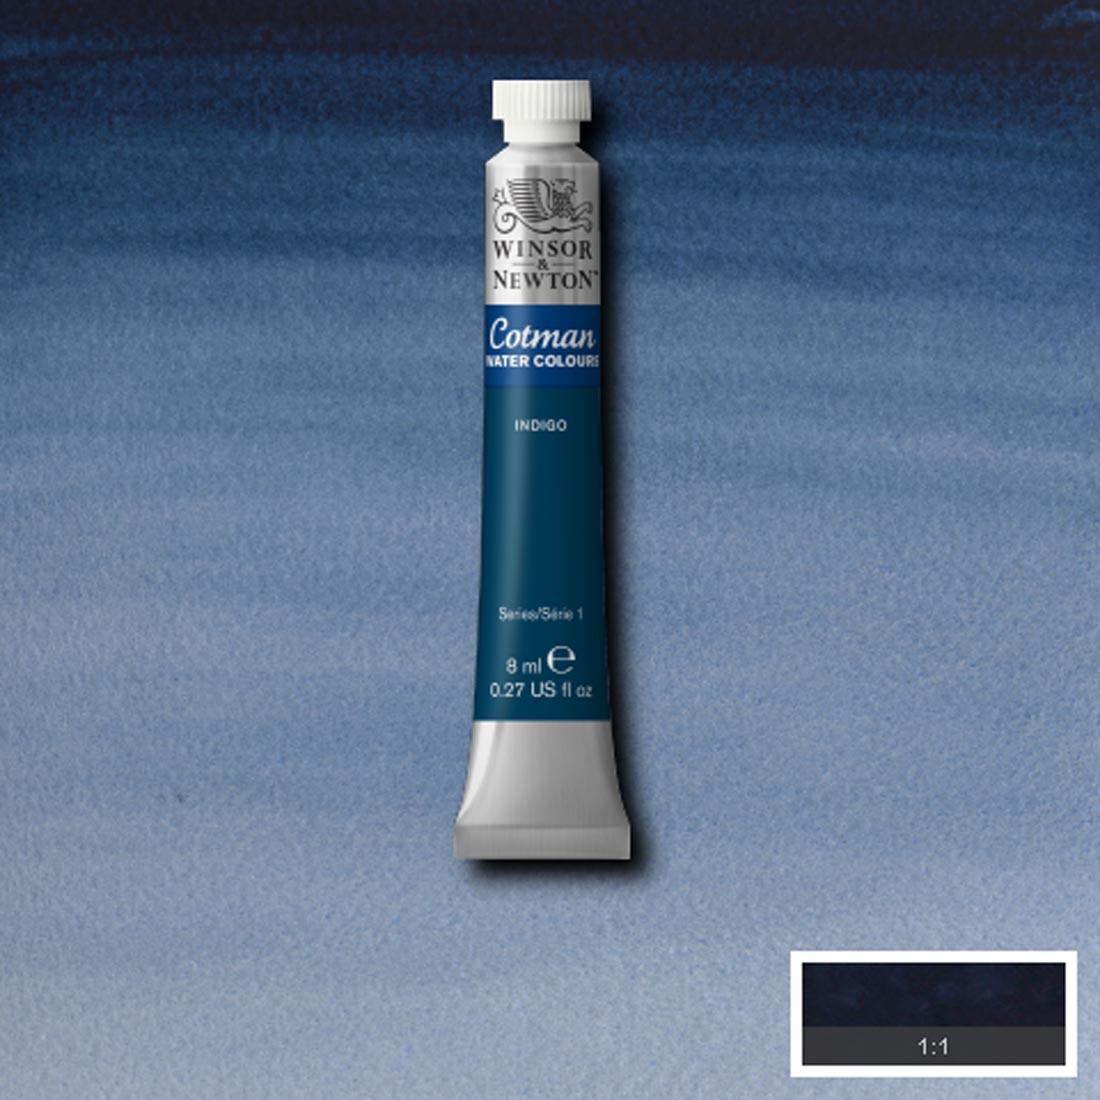 Tube of Indigo Winsor and Newton Cotman Water Colour with a paint swatch for the background